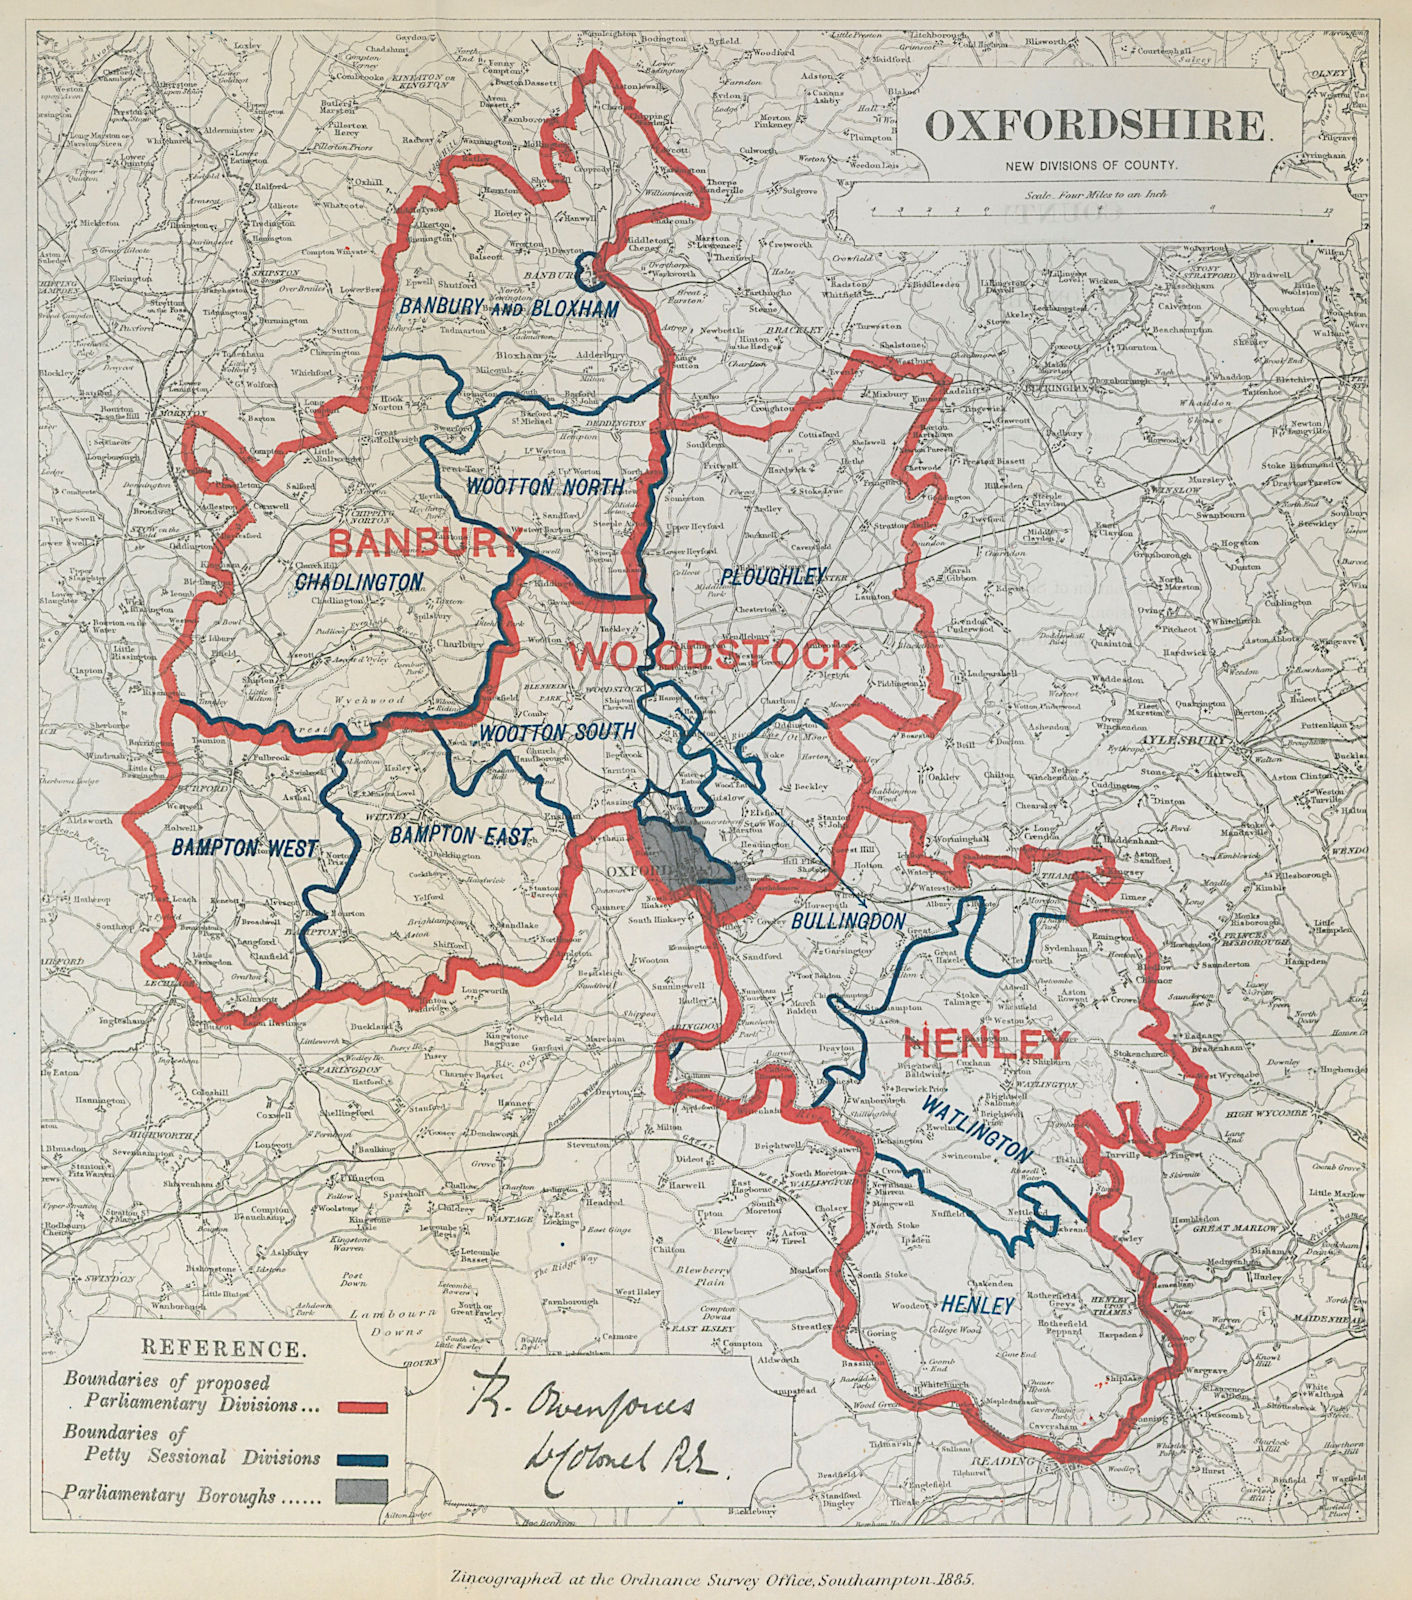 Associate Product Oxfordshire Parliamentary Divisions. Banbury Henley BOUNDARY COMMISSION 1885 map